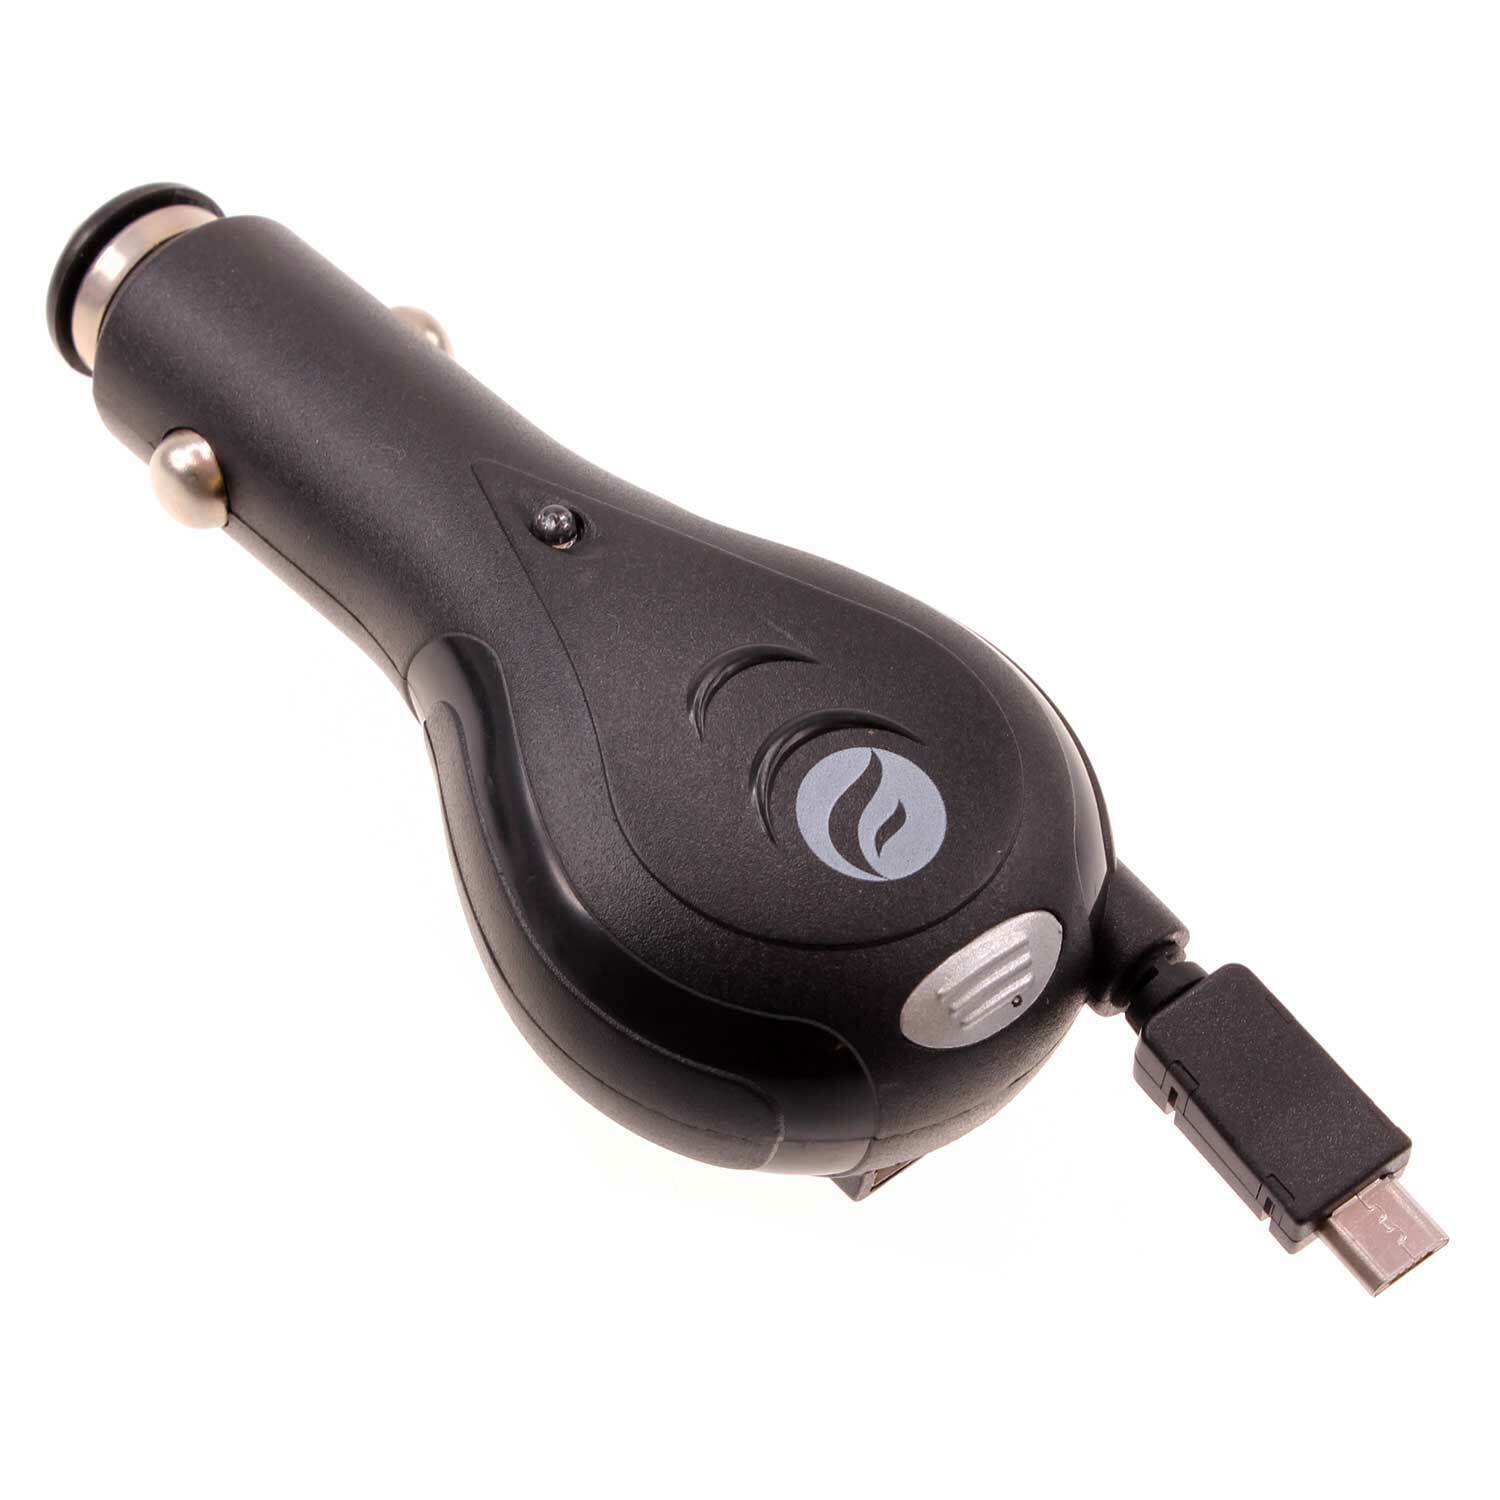 CAR CHARGER RETRACTABLE 3.1A USB PORT MICRO-USB DC SOCKET POWER for CELL PHONES